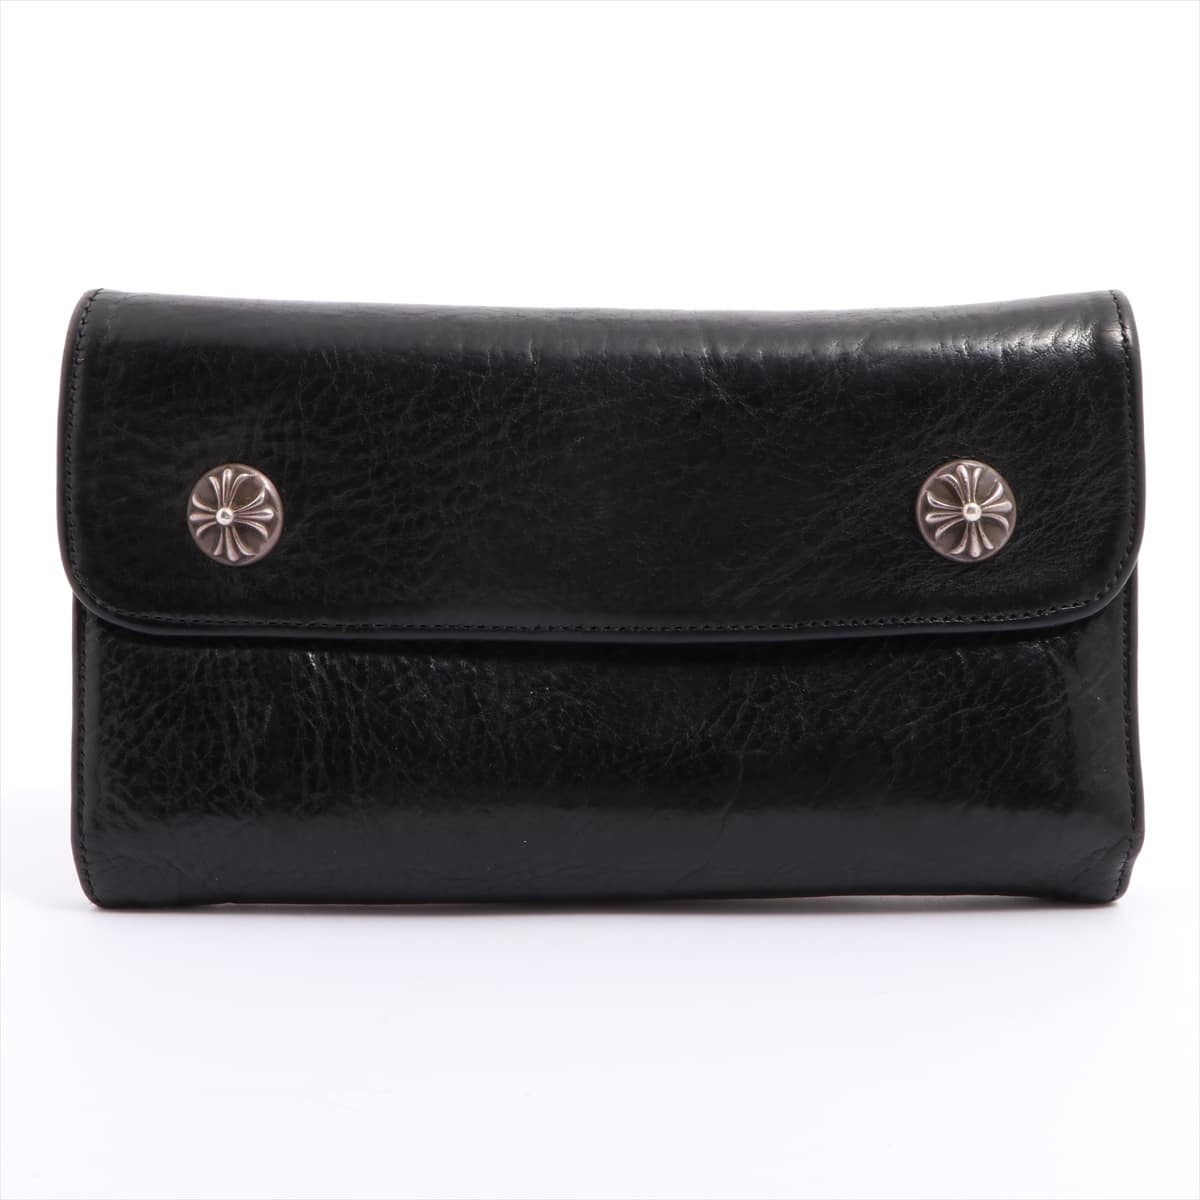 Chrome Hearts Wave Wallet Heavy leather With invoice The cross button is loose